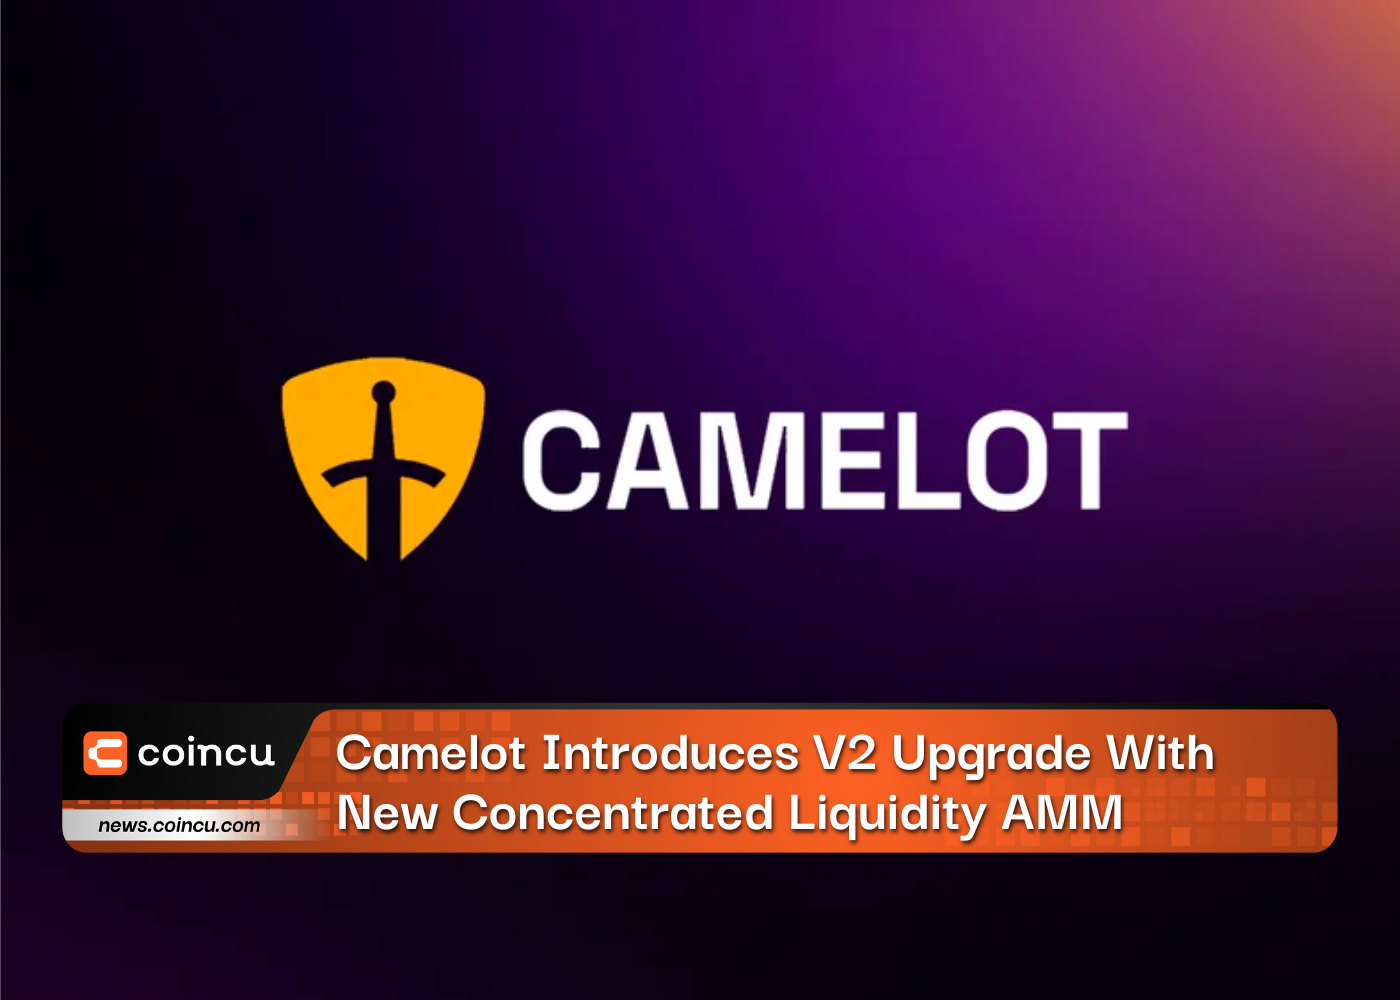 Camelot Introduces V2 Upgrade With New Concentrated Liquidity AMM